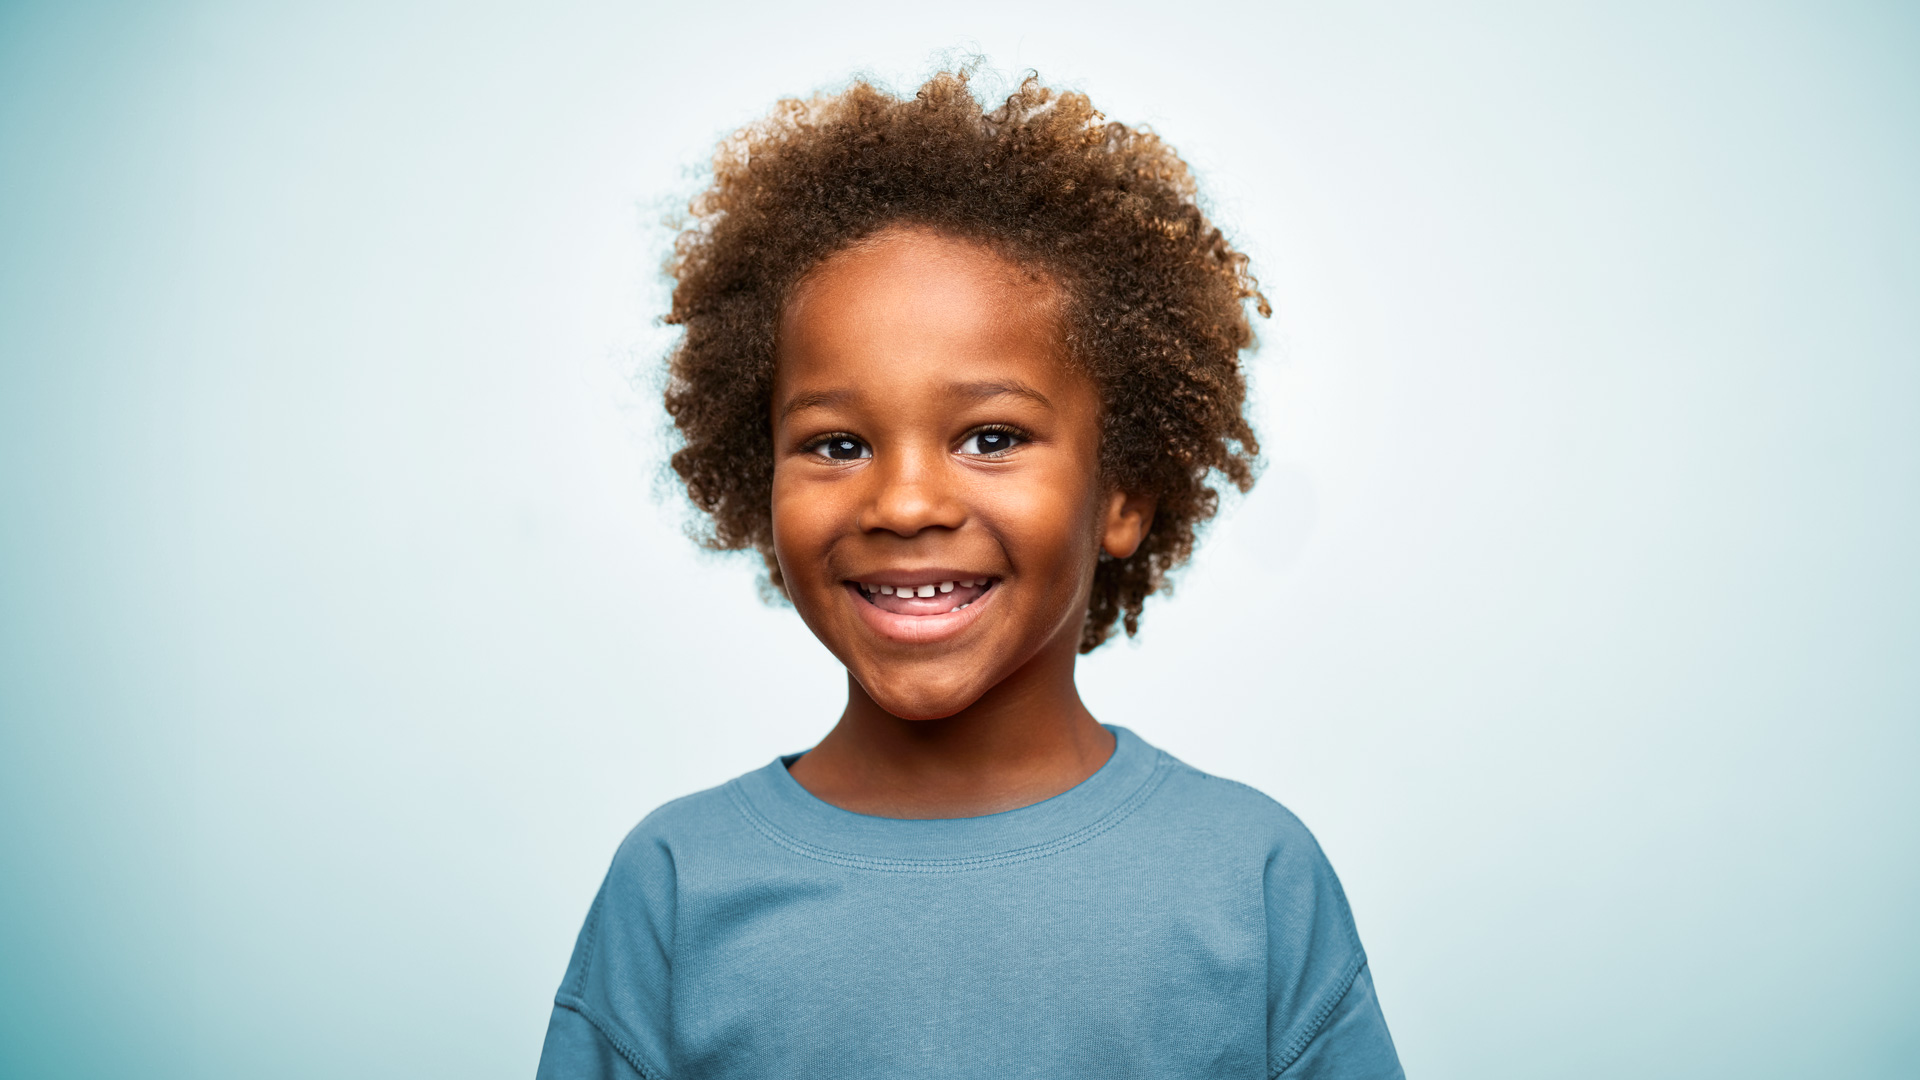 Smiling young African American boy with curly brown hair, in a blue shirt